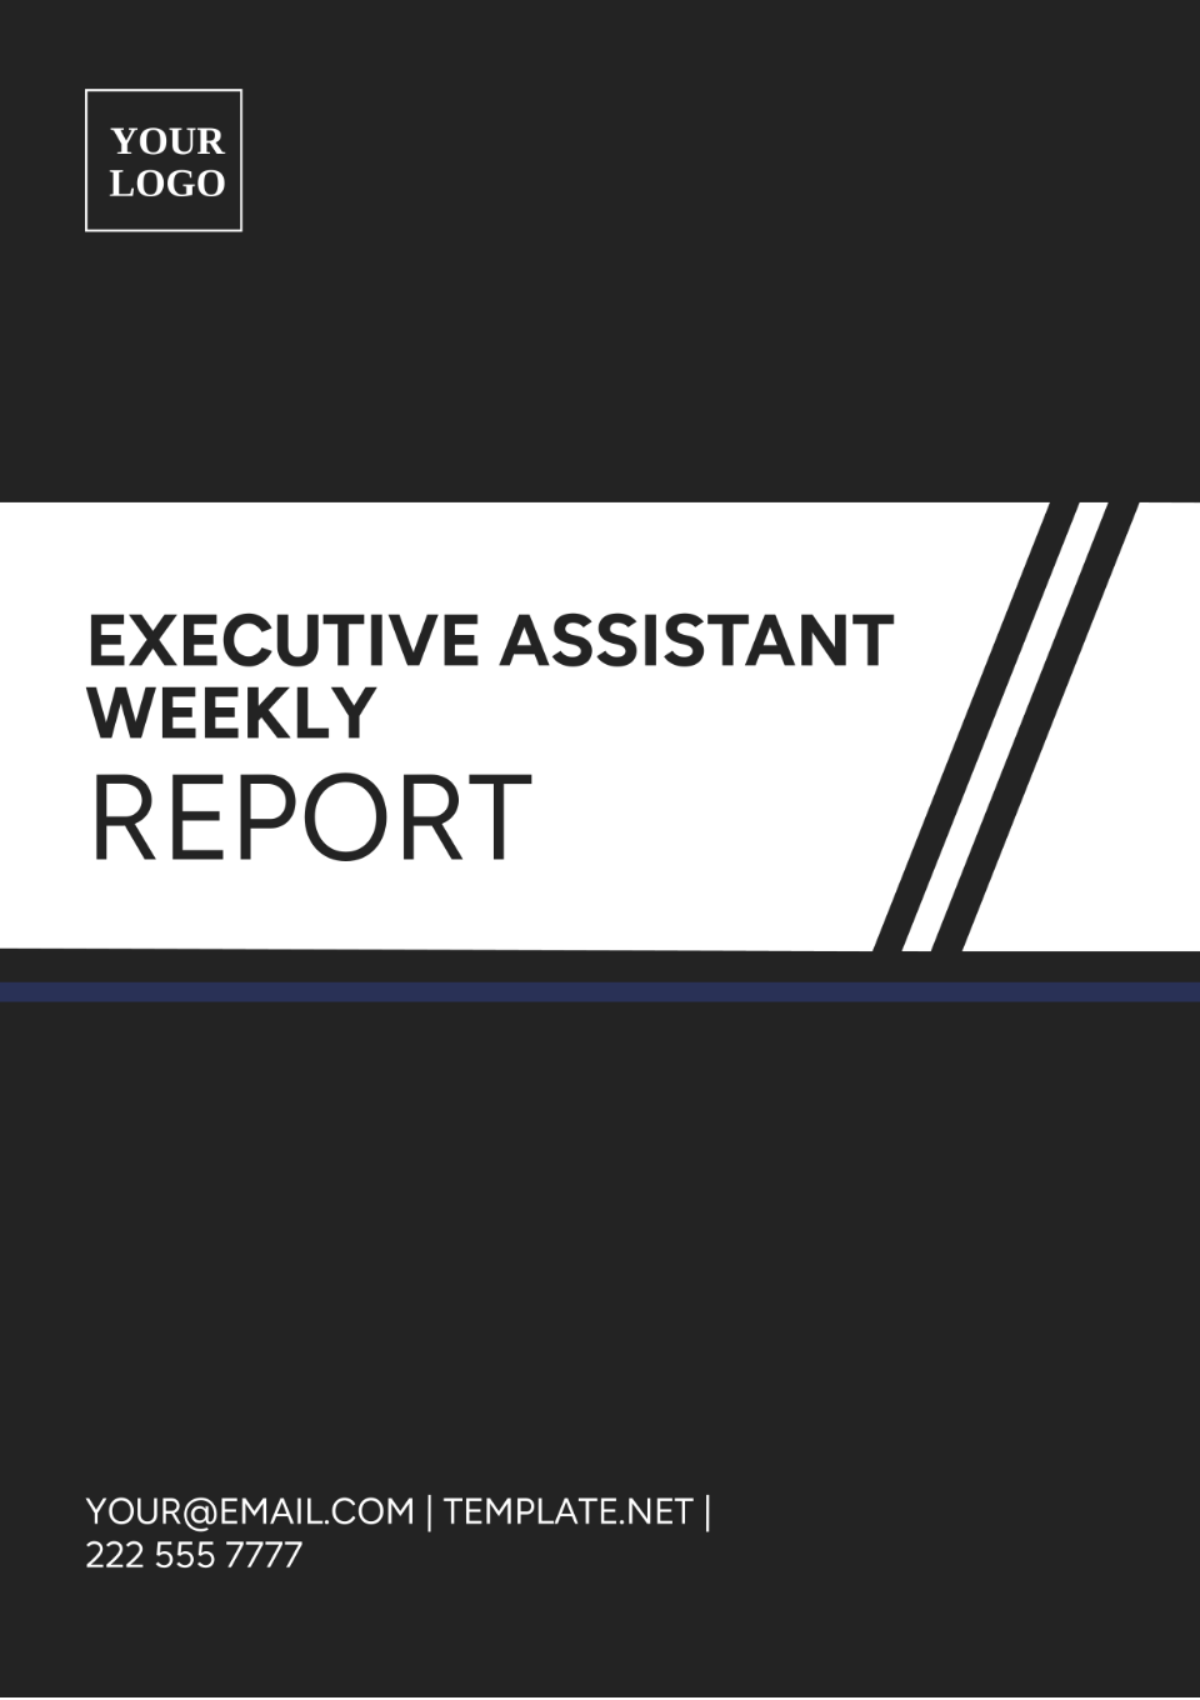 Free Executive Assistant Weekly Report Template